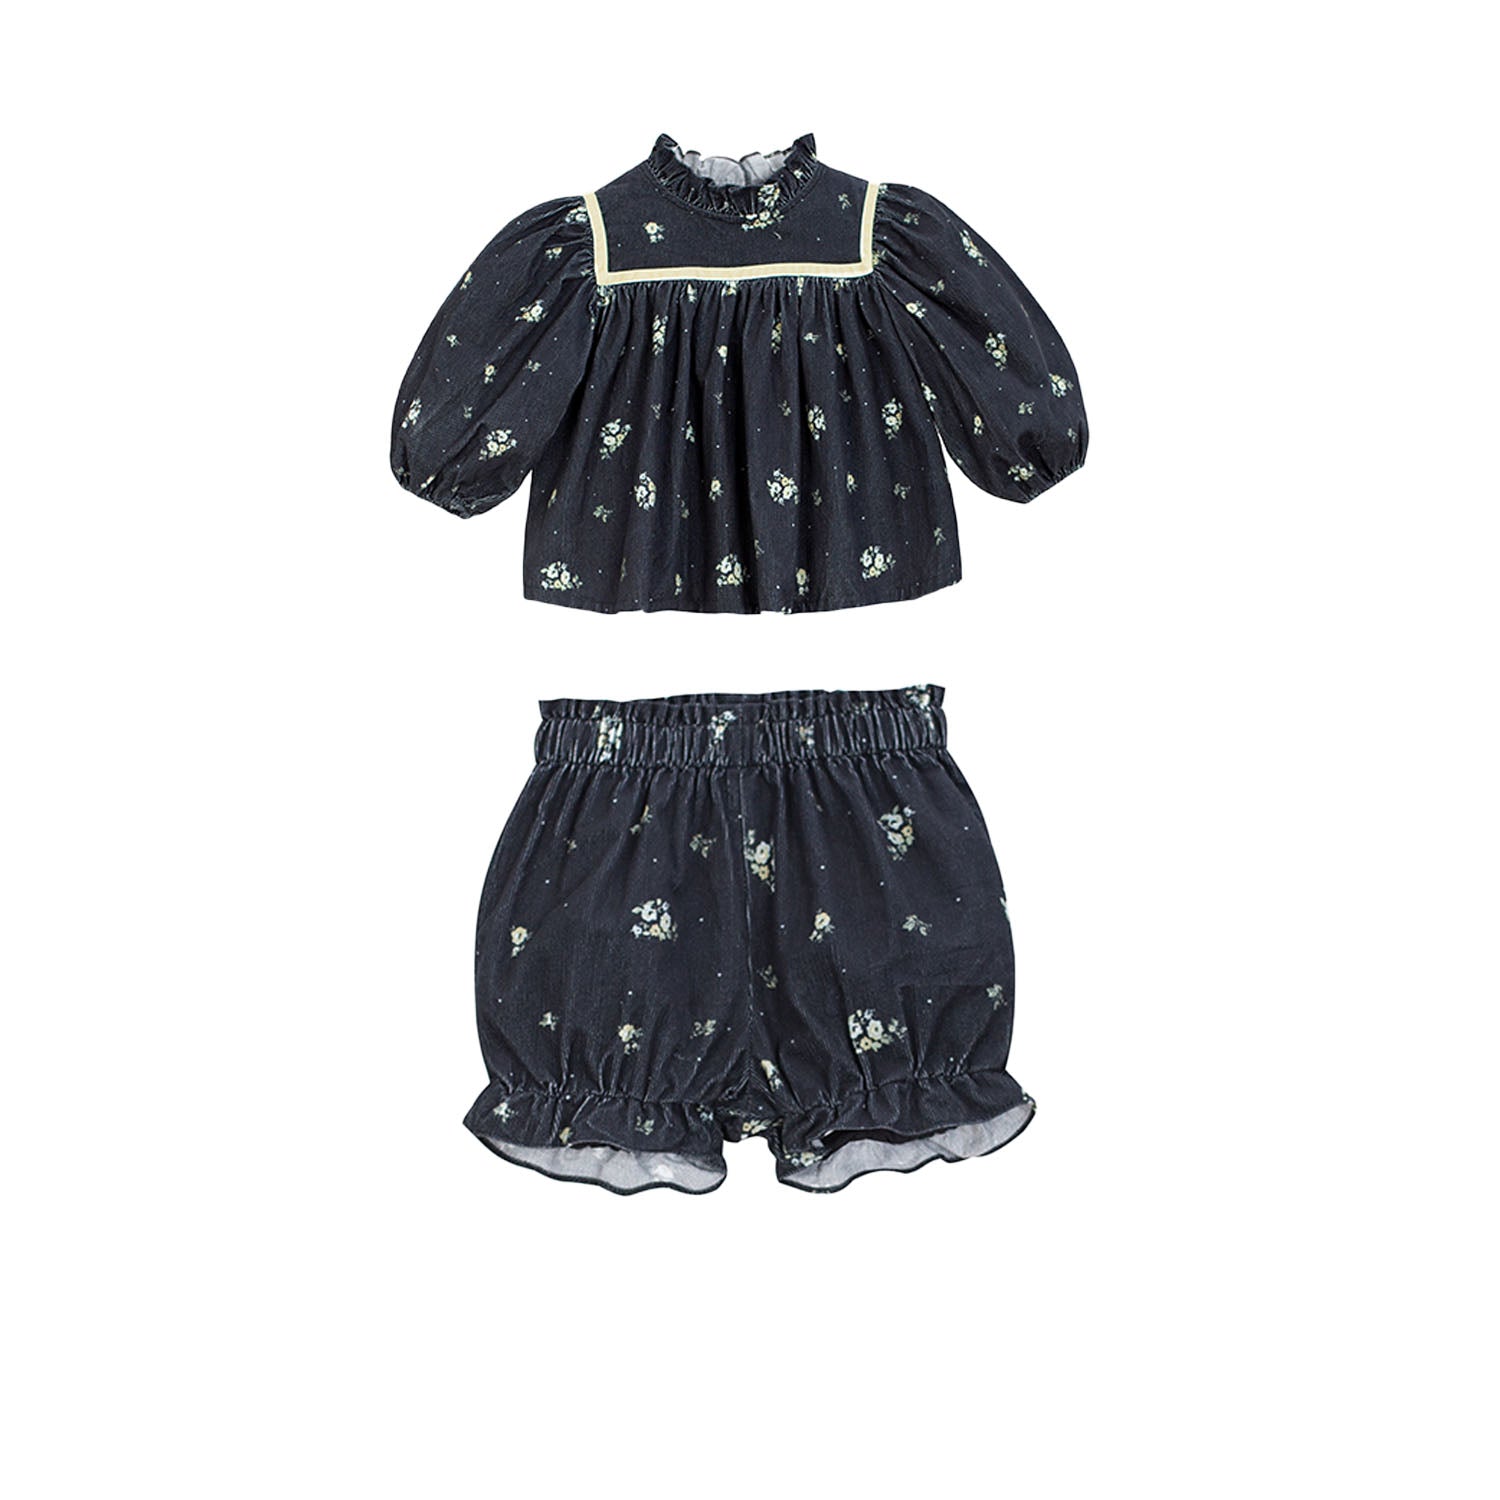 Cera Una Volta Ayame Blouse And Bloomer - Black Flower